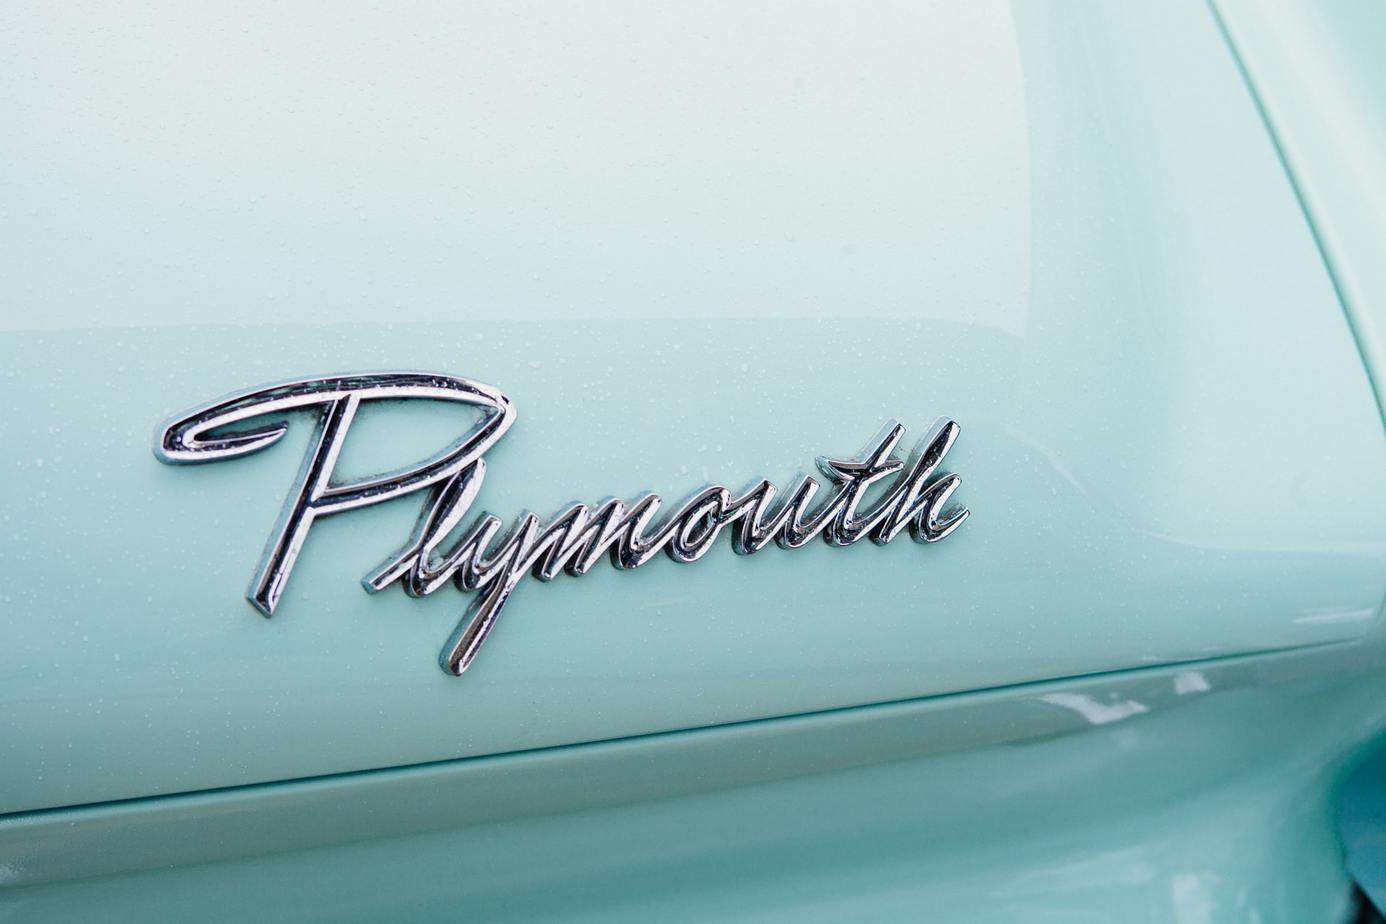 Plymouth – the history of the brand that ruled in the 1960s.